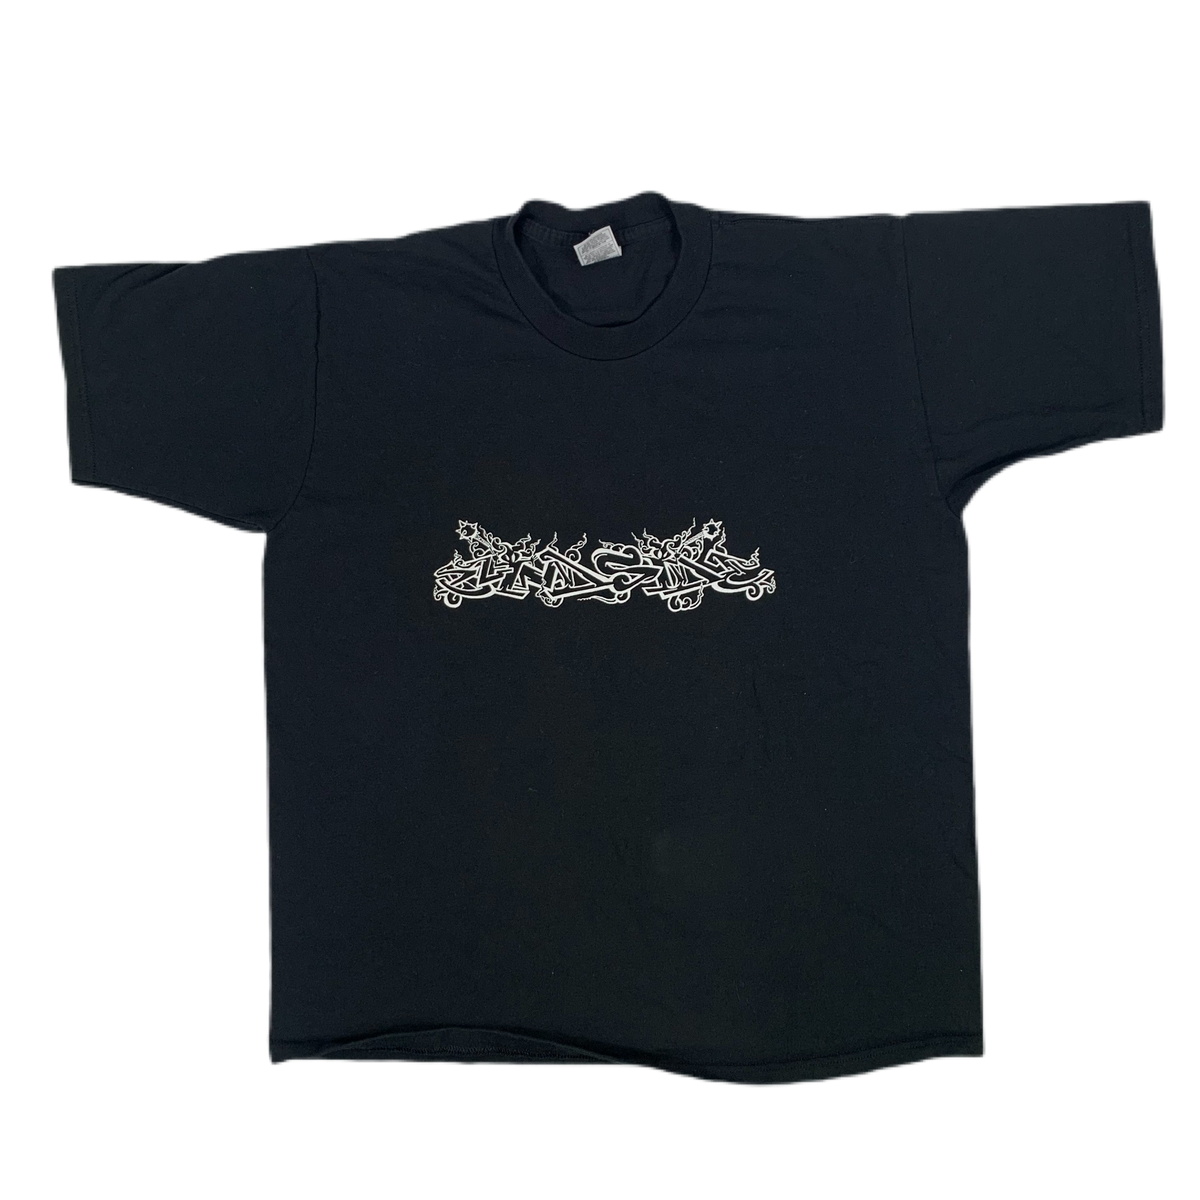 Vintage Blindside &quot;Tooth &amp; Nail Records&quot; T-Shirt